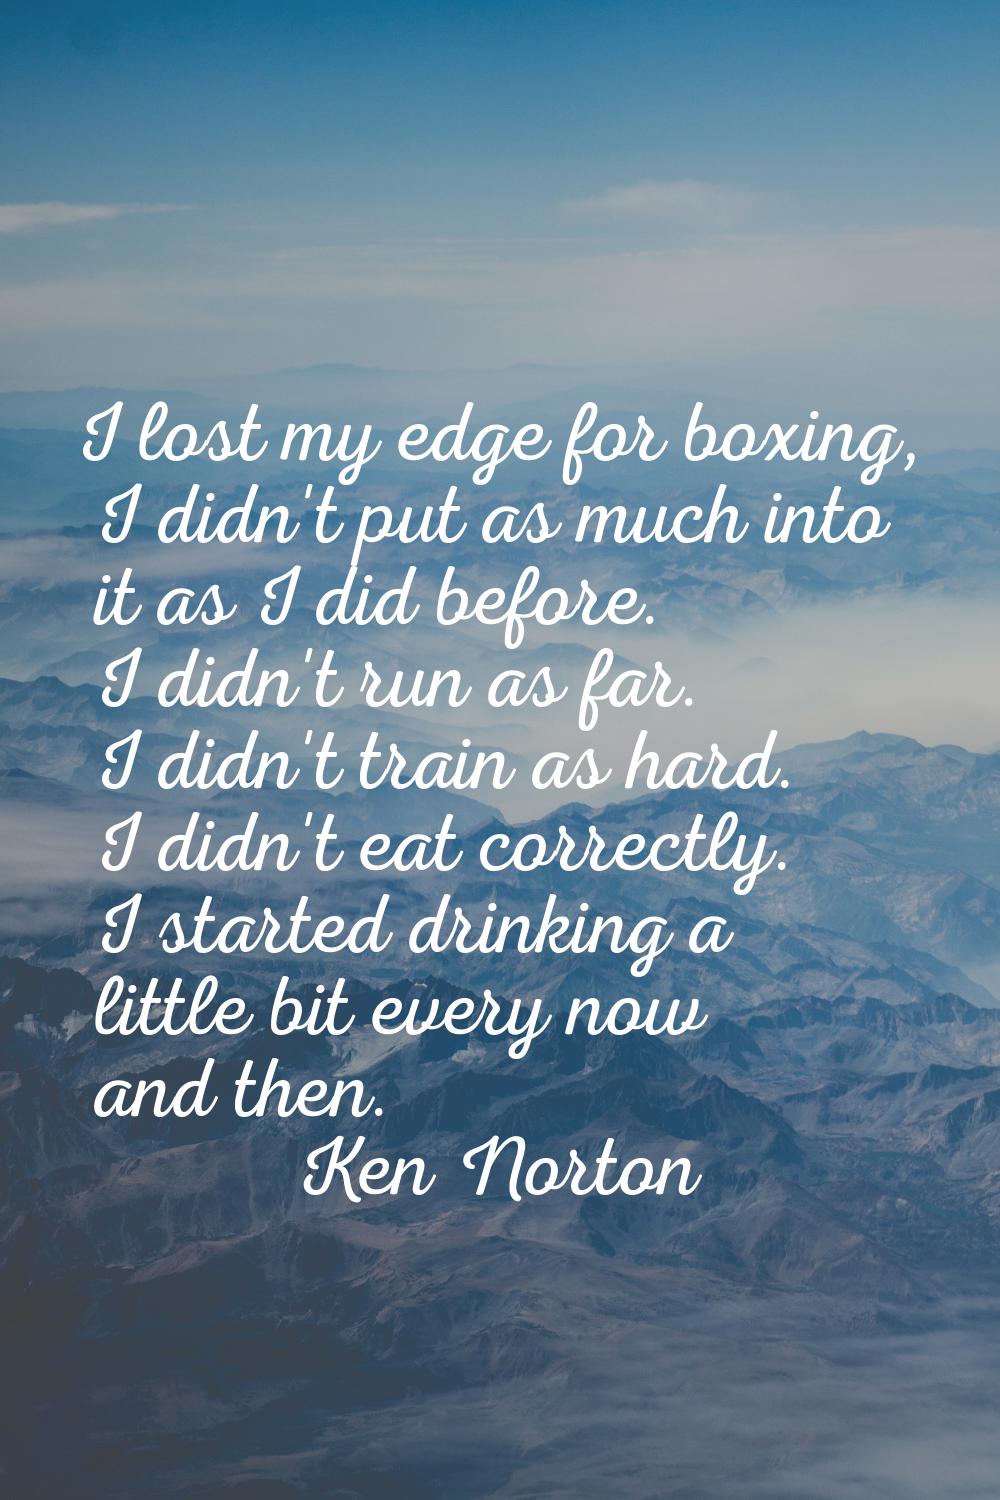 I lost my edge for boxing, I didn't put as much into it as I did before. I didn't run as far. I did